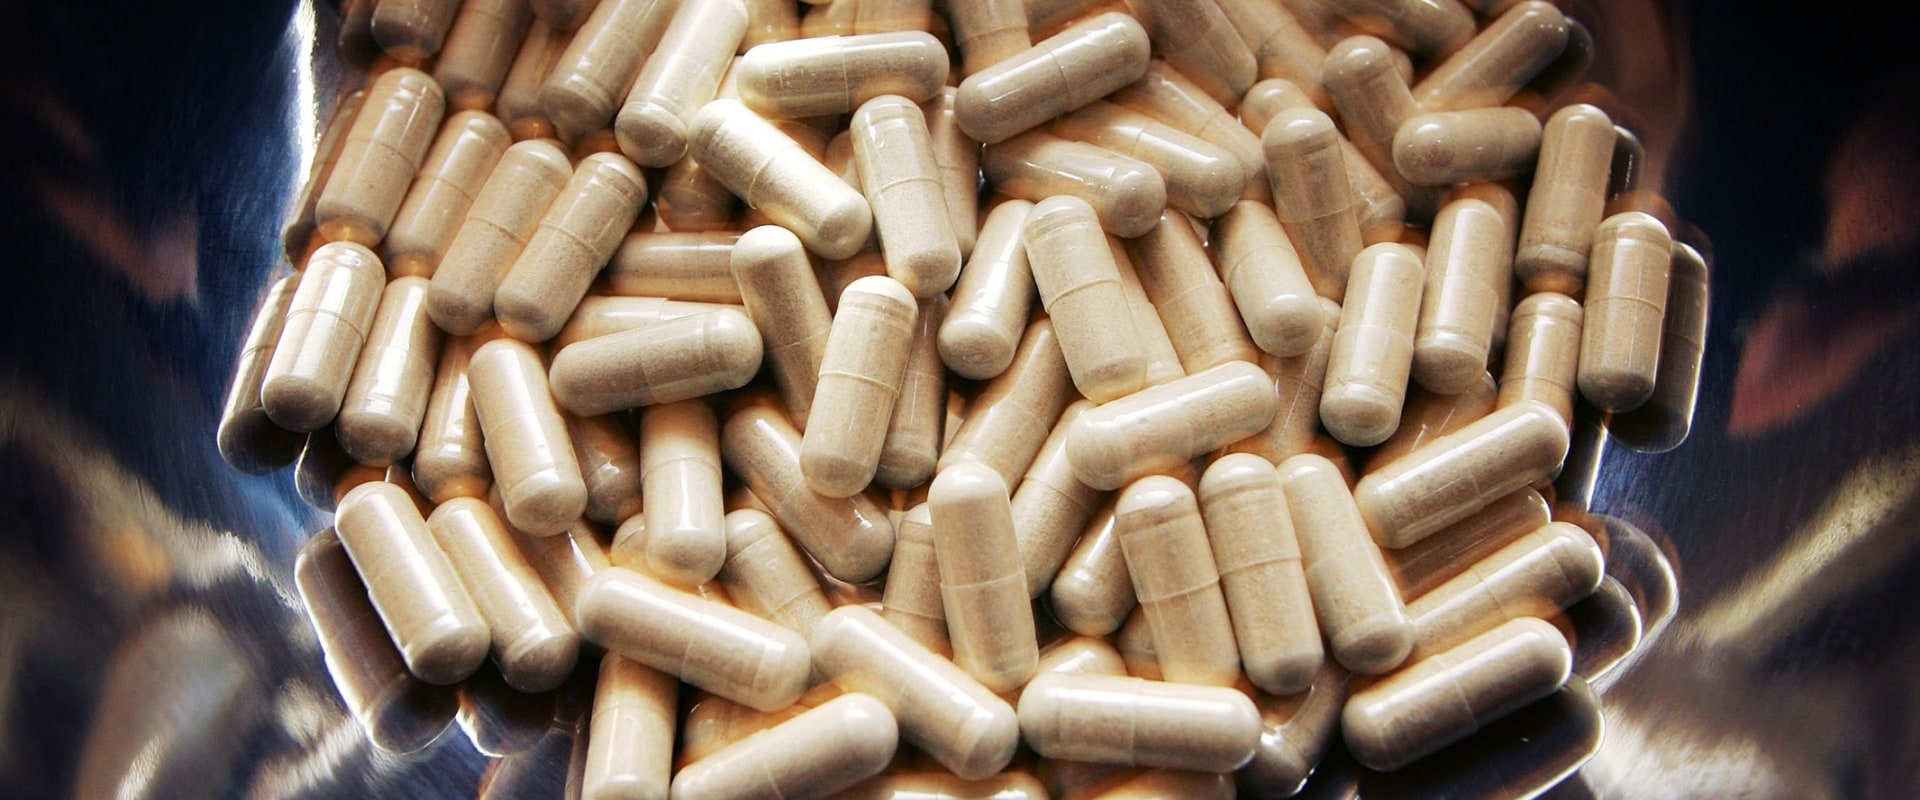 Which dietary supplement is the most popular?